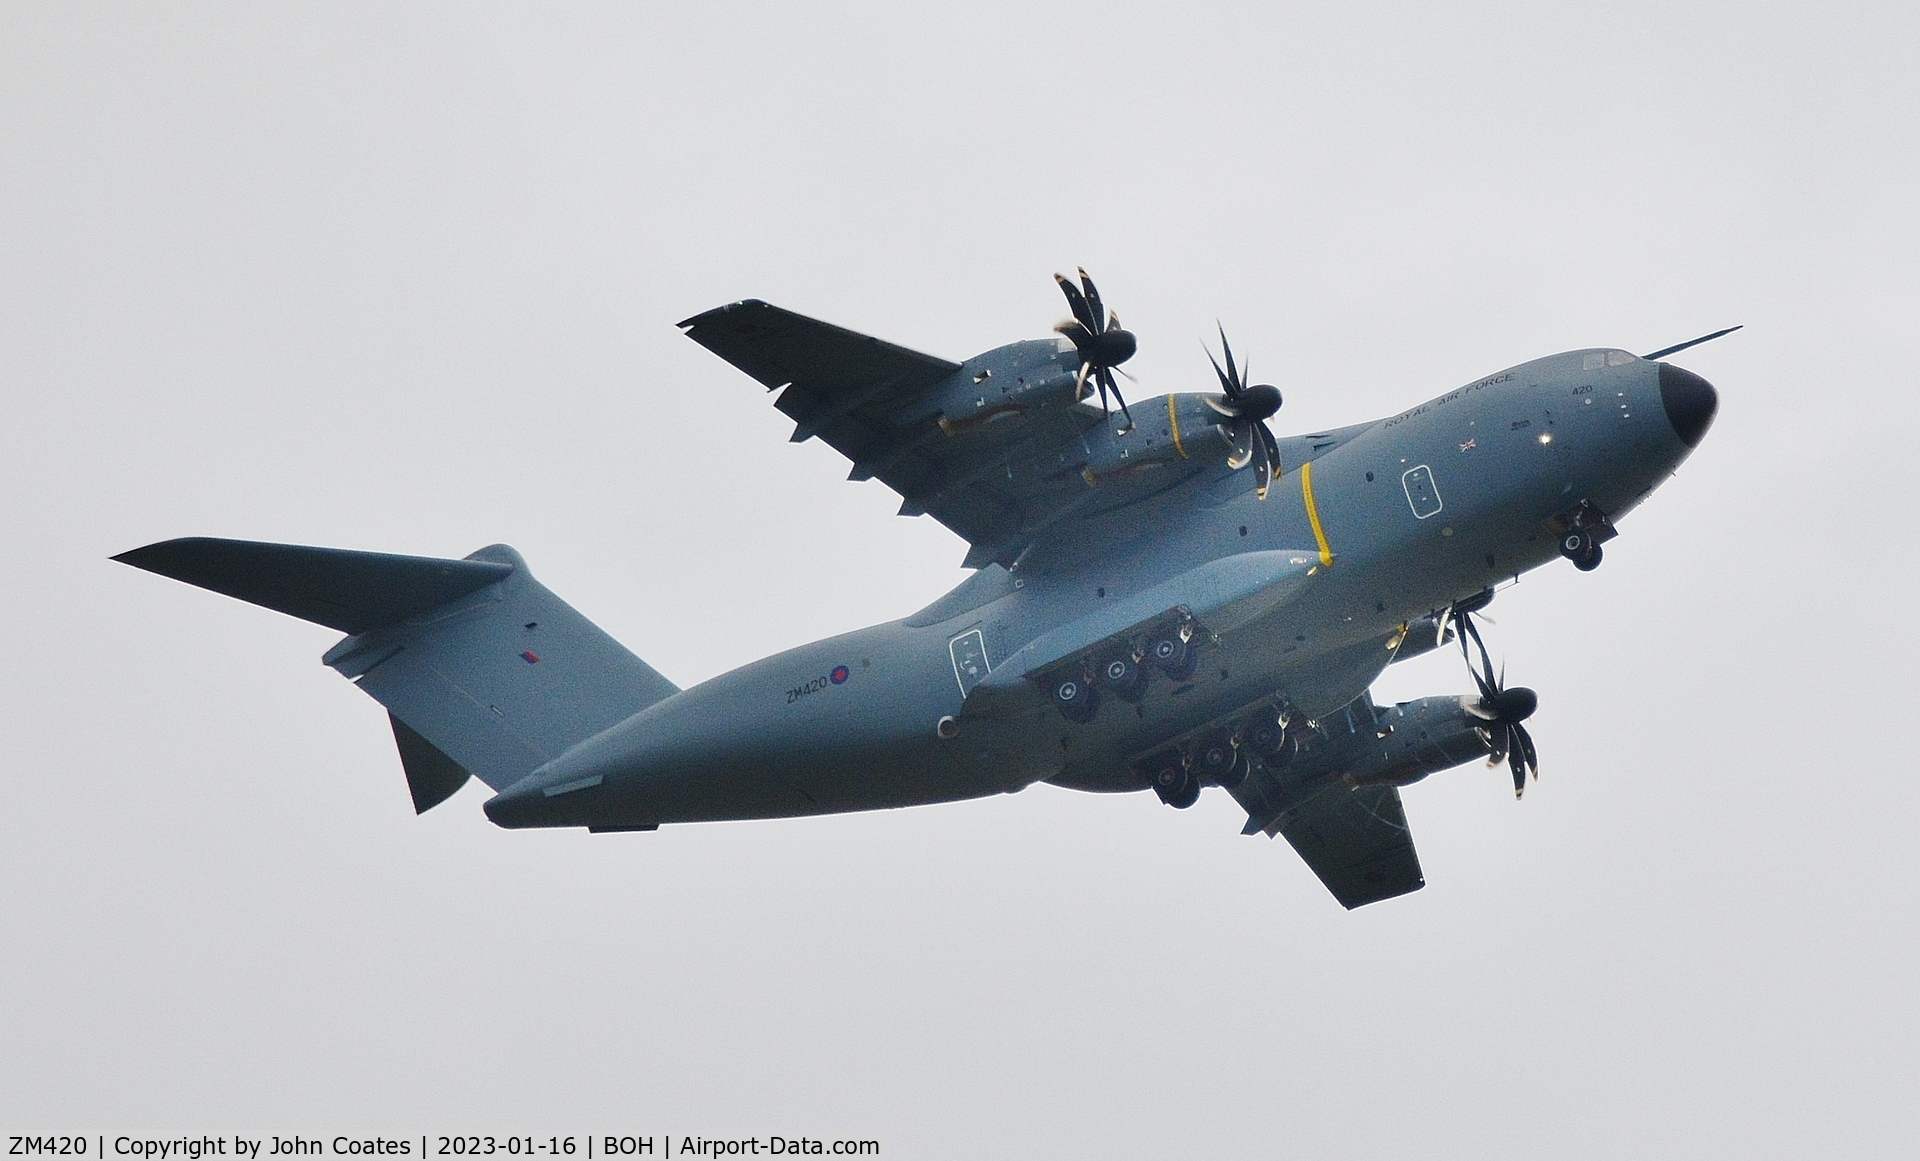 ZM420, Airbus 400M-180 Atlas C.1 C/N 056, Climbing after missed approach in training